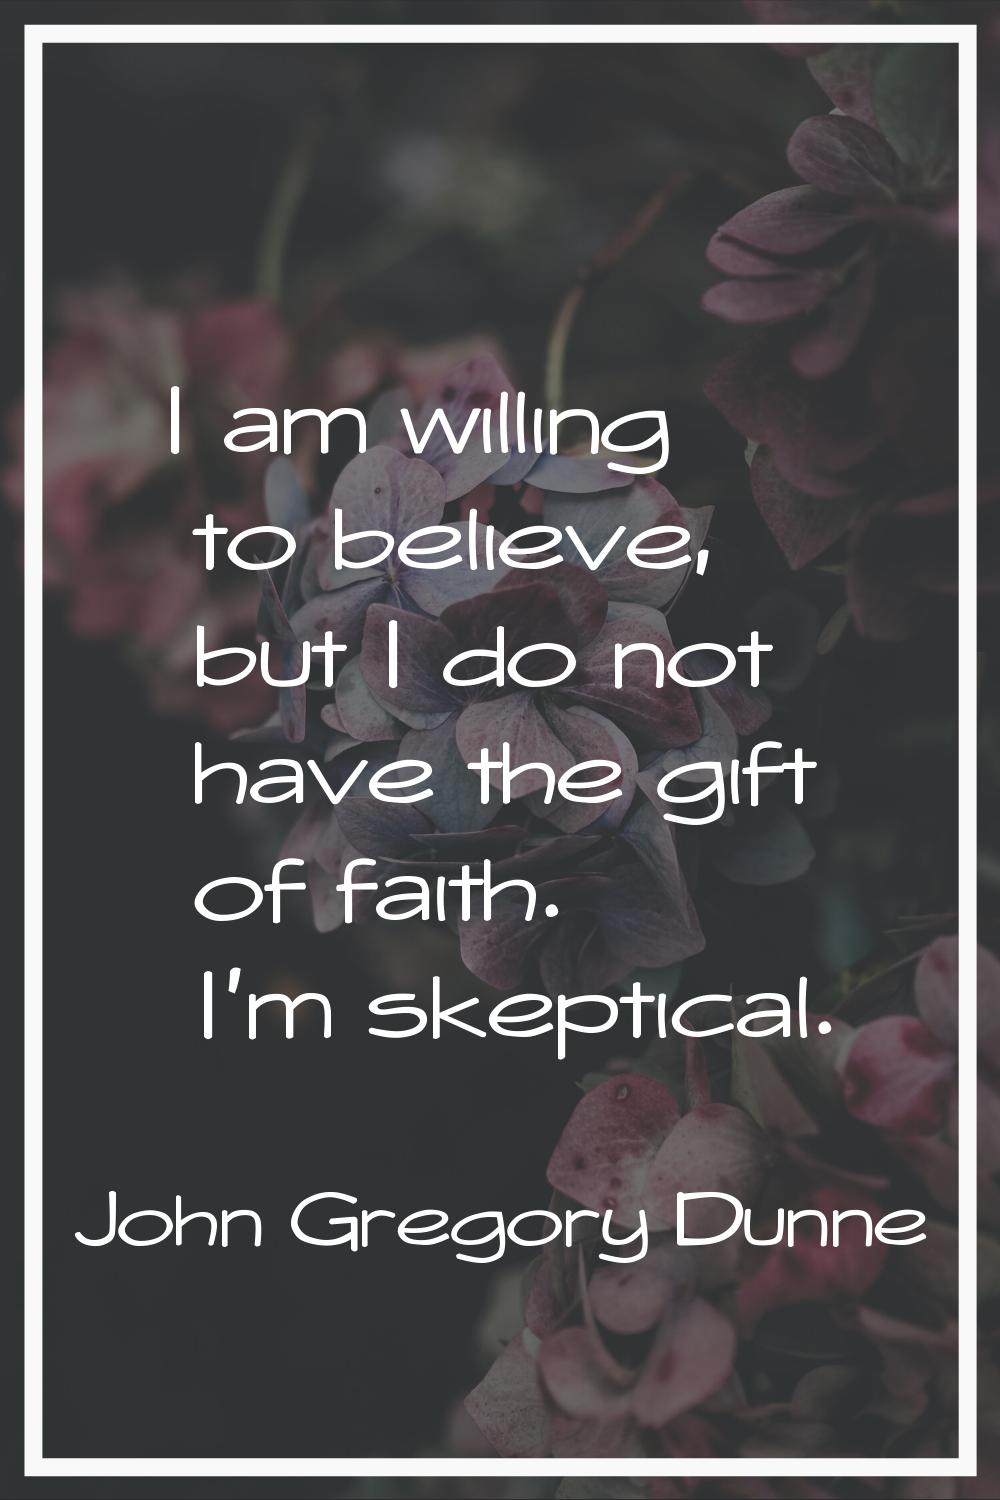 I am willing to believe, but I do not have the gift of faith. I'm skeptical.